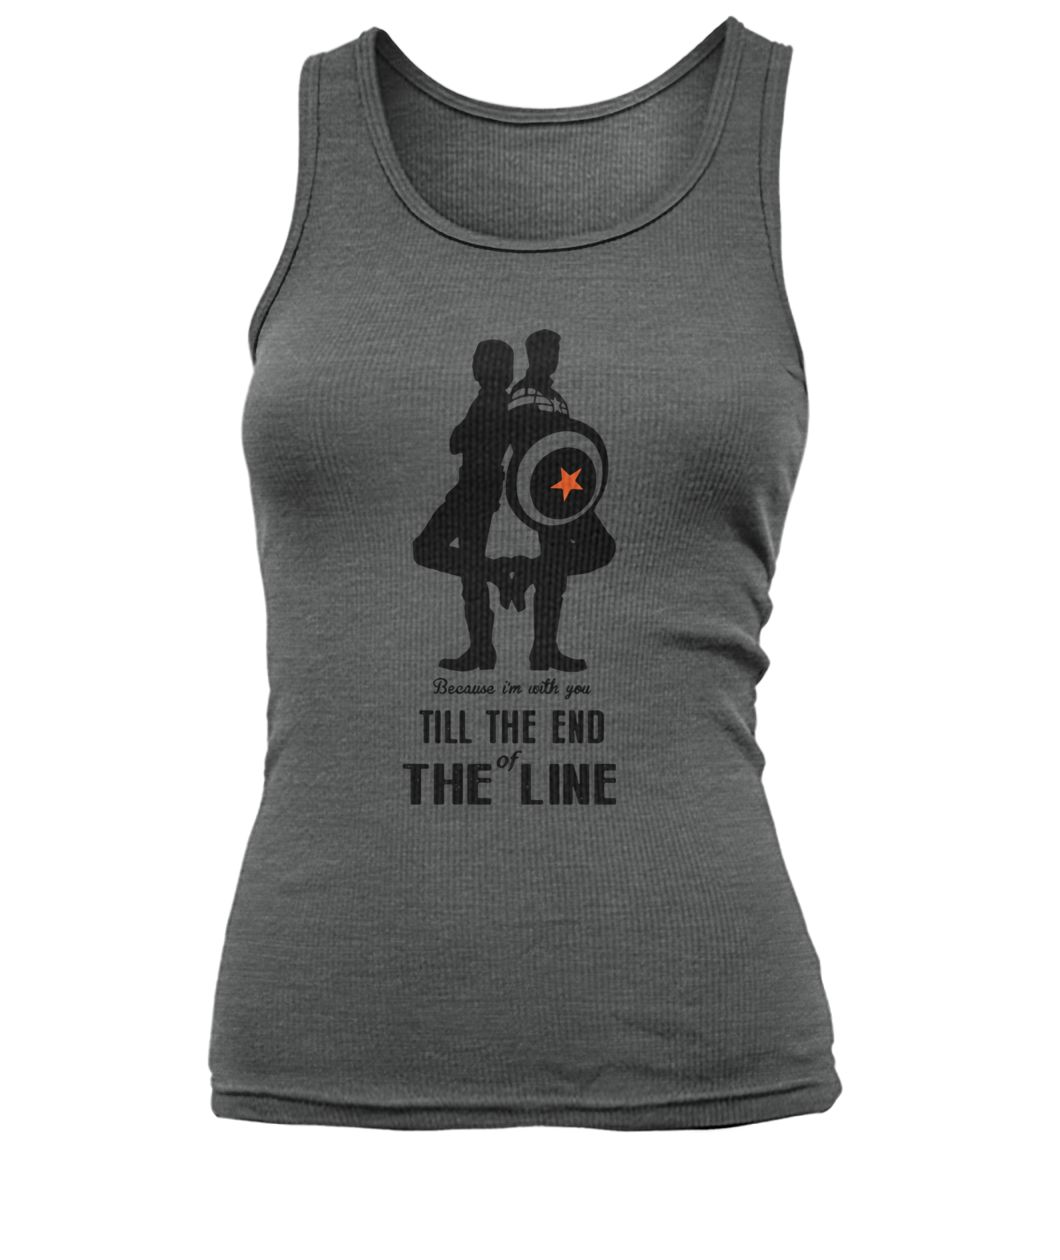 Captain america and bucky barnes because I’m with you till the end of the line women's tank top